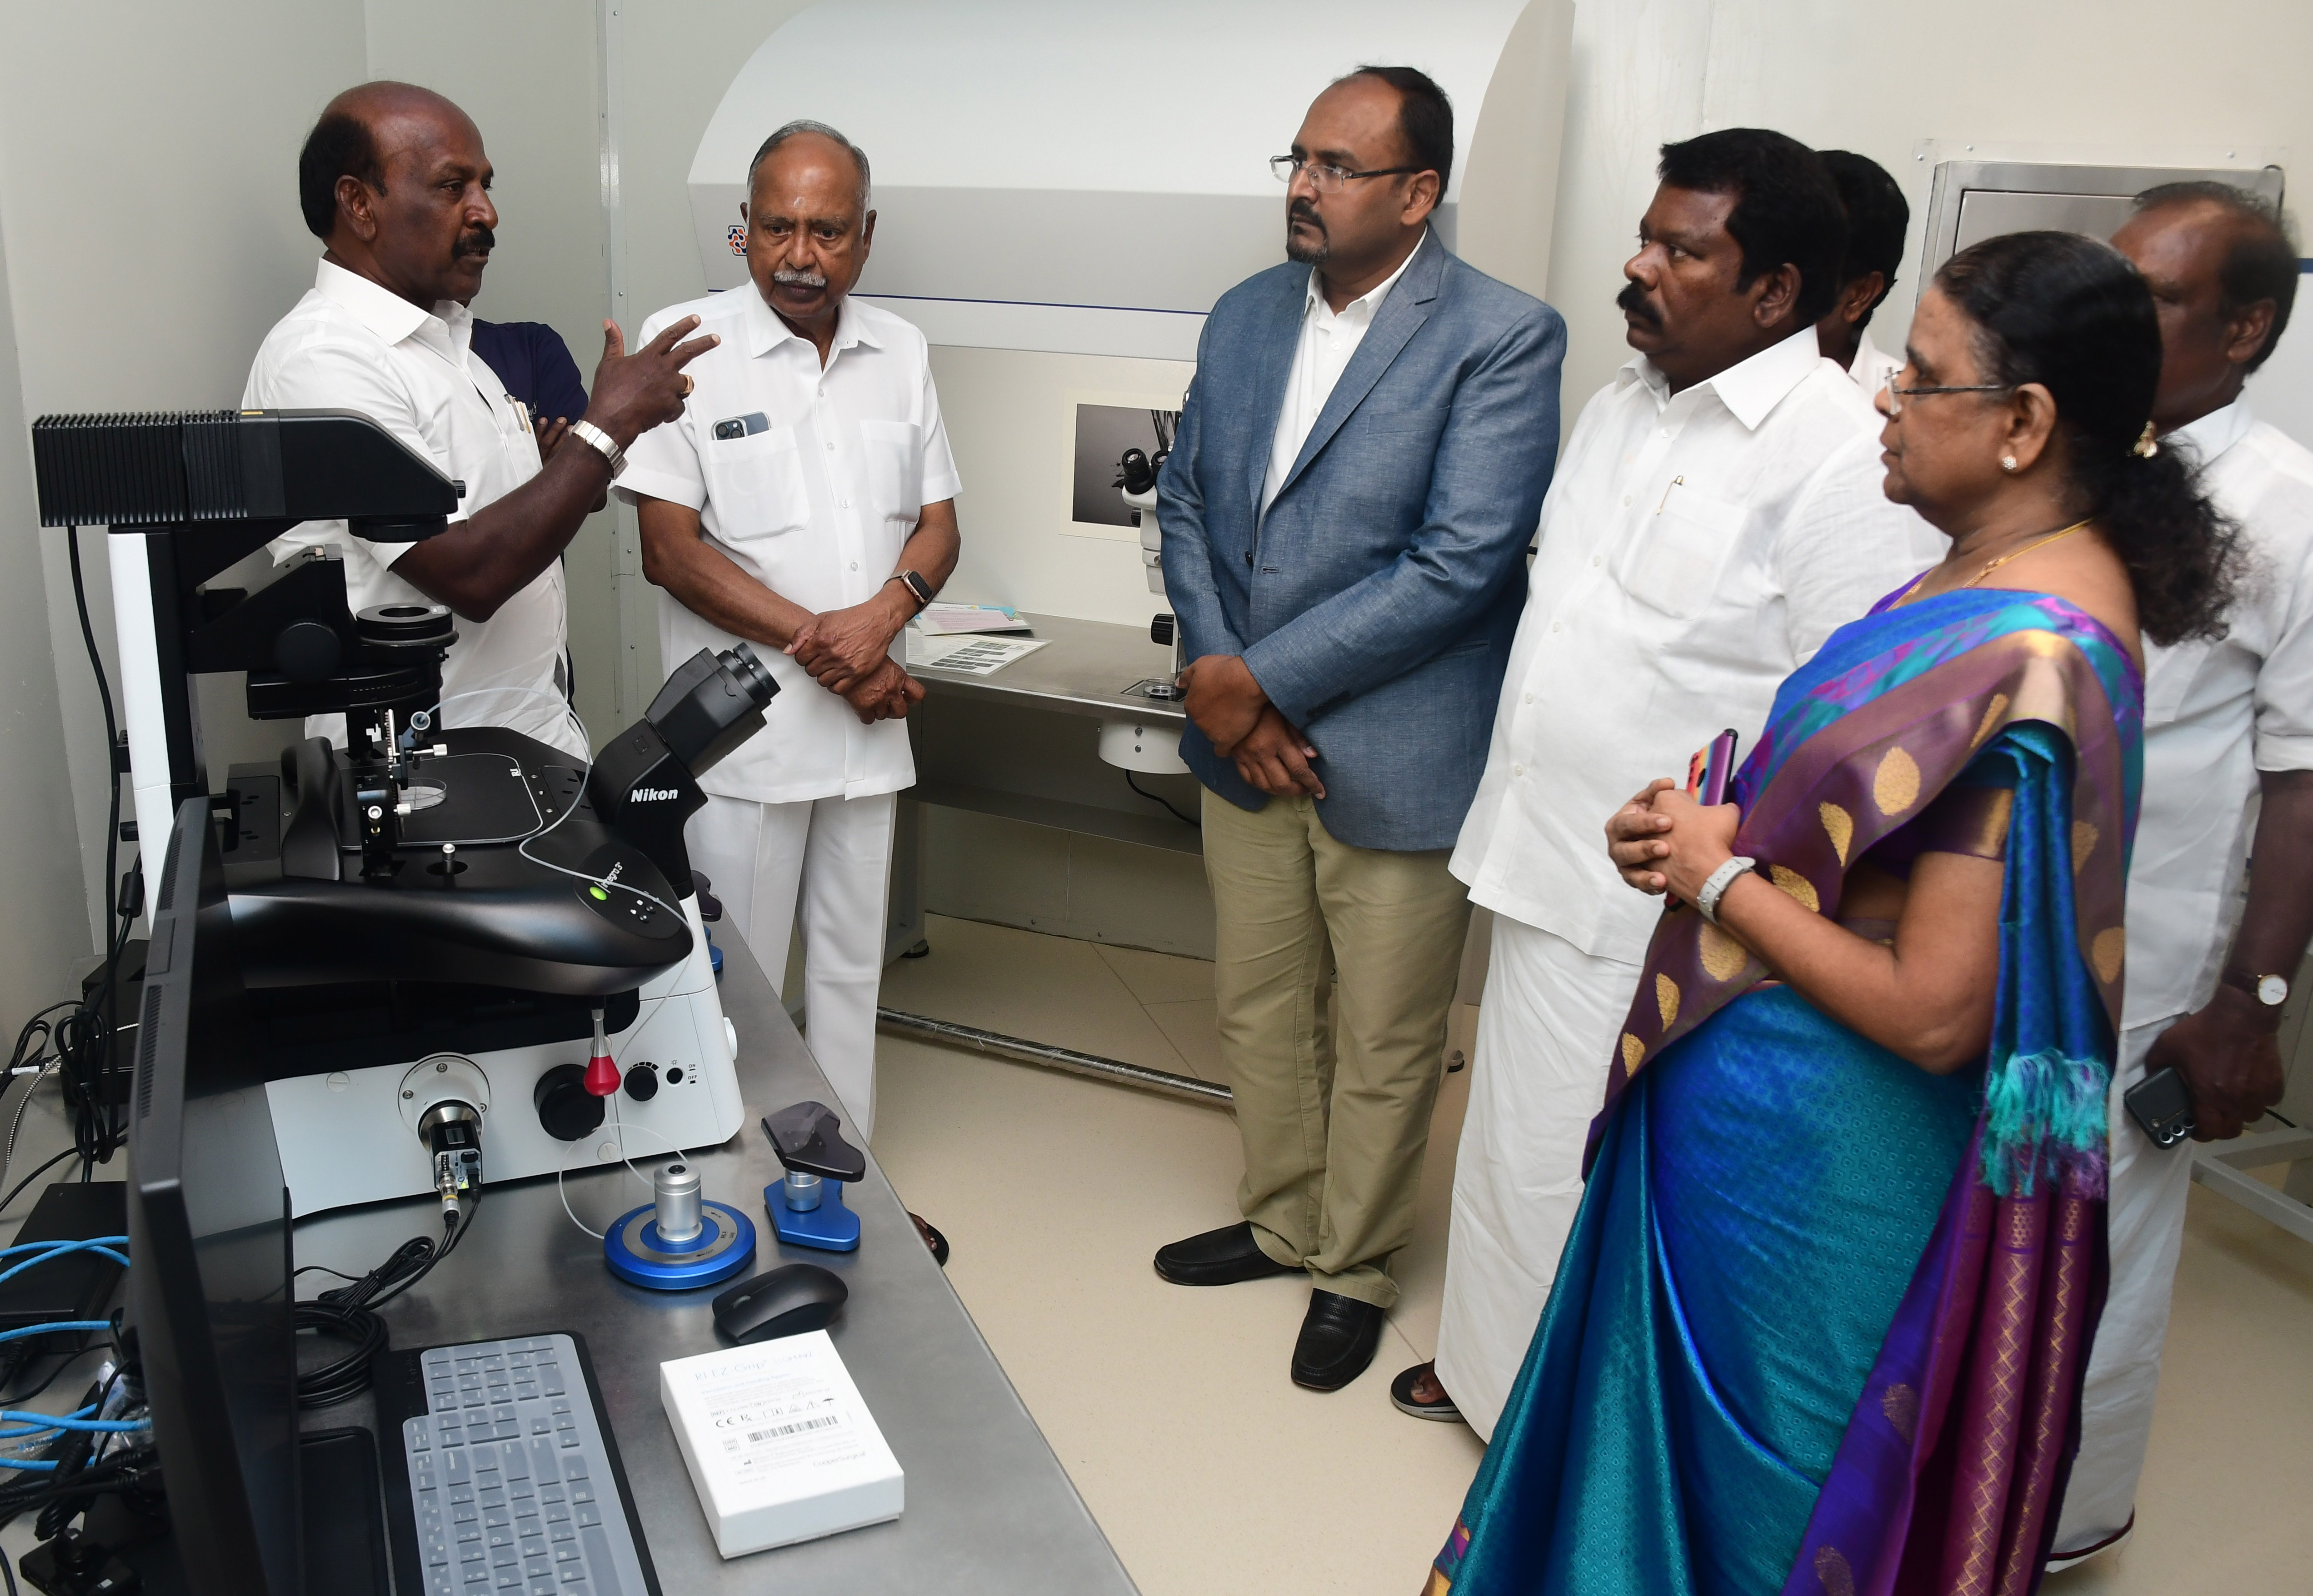 Health Minister Ma. Subramanian Inaugurates SPROUT, Saveetha Medical College Hospital’s New Fertility Centre